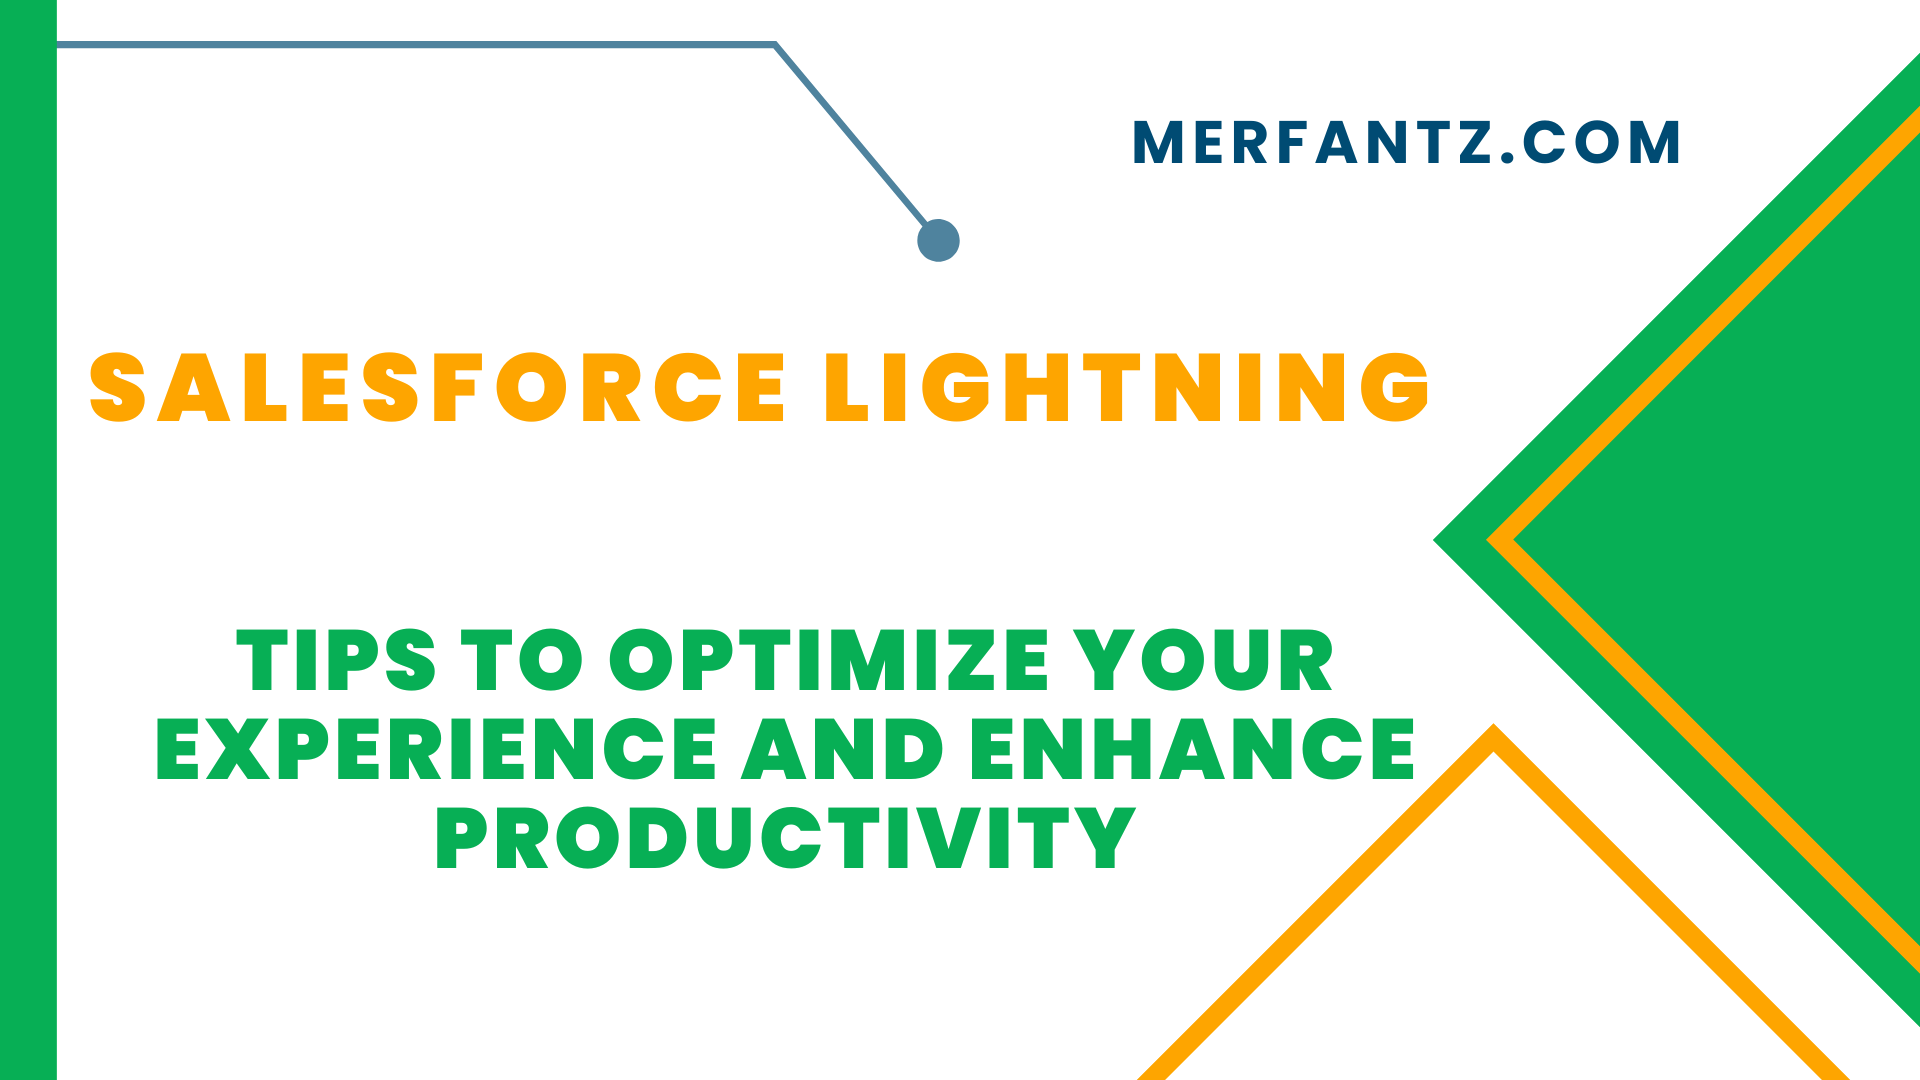 Salesforce Lightning Tips to Optimize Your Experience and Enhance Productivity